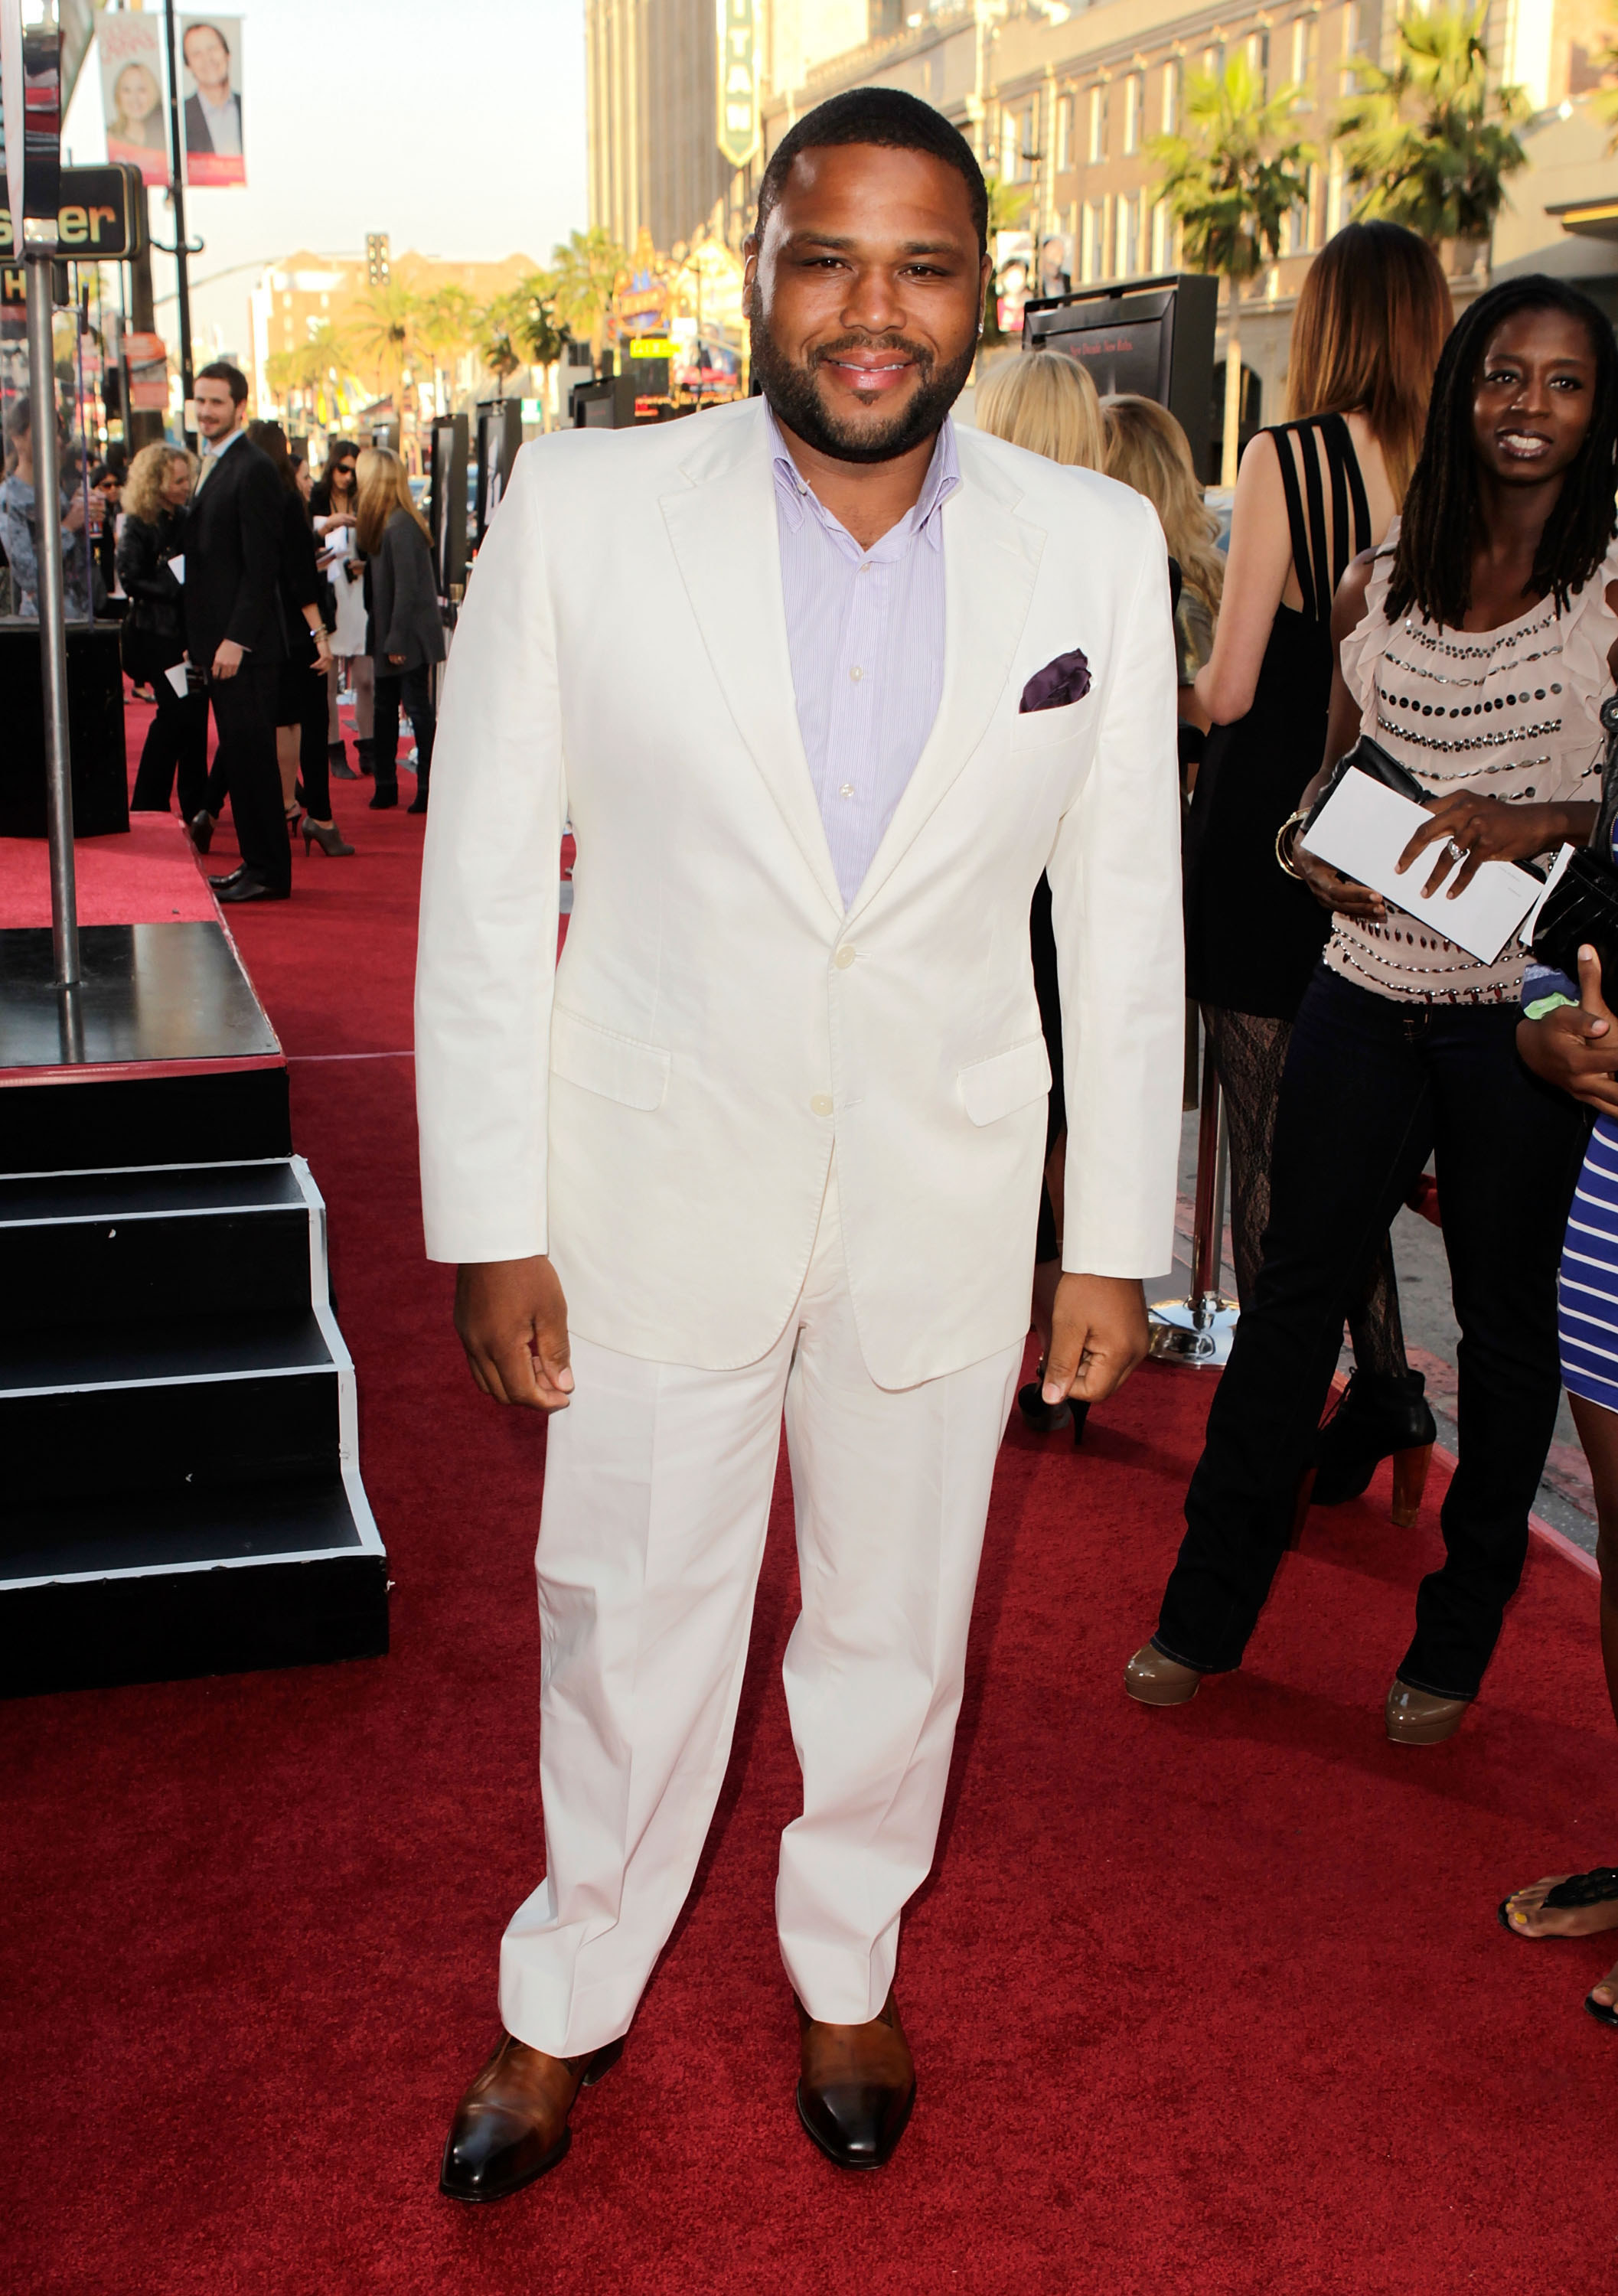 Anthony Anderson in a white suit and light blue collared shirt